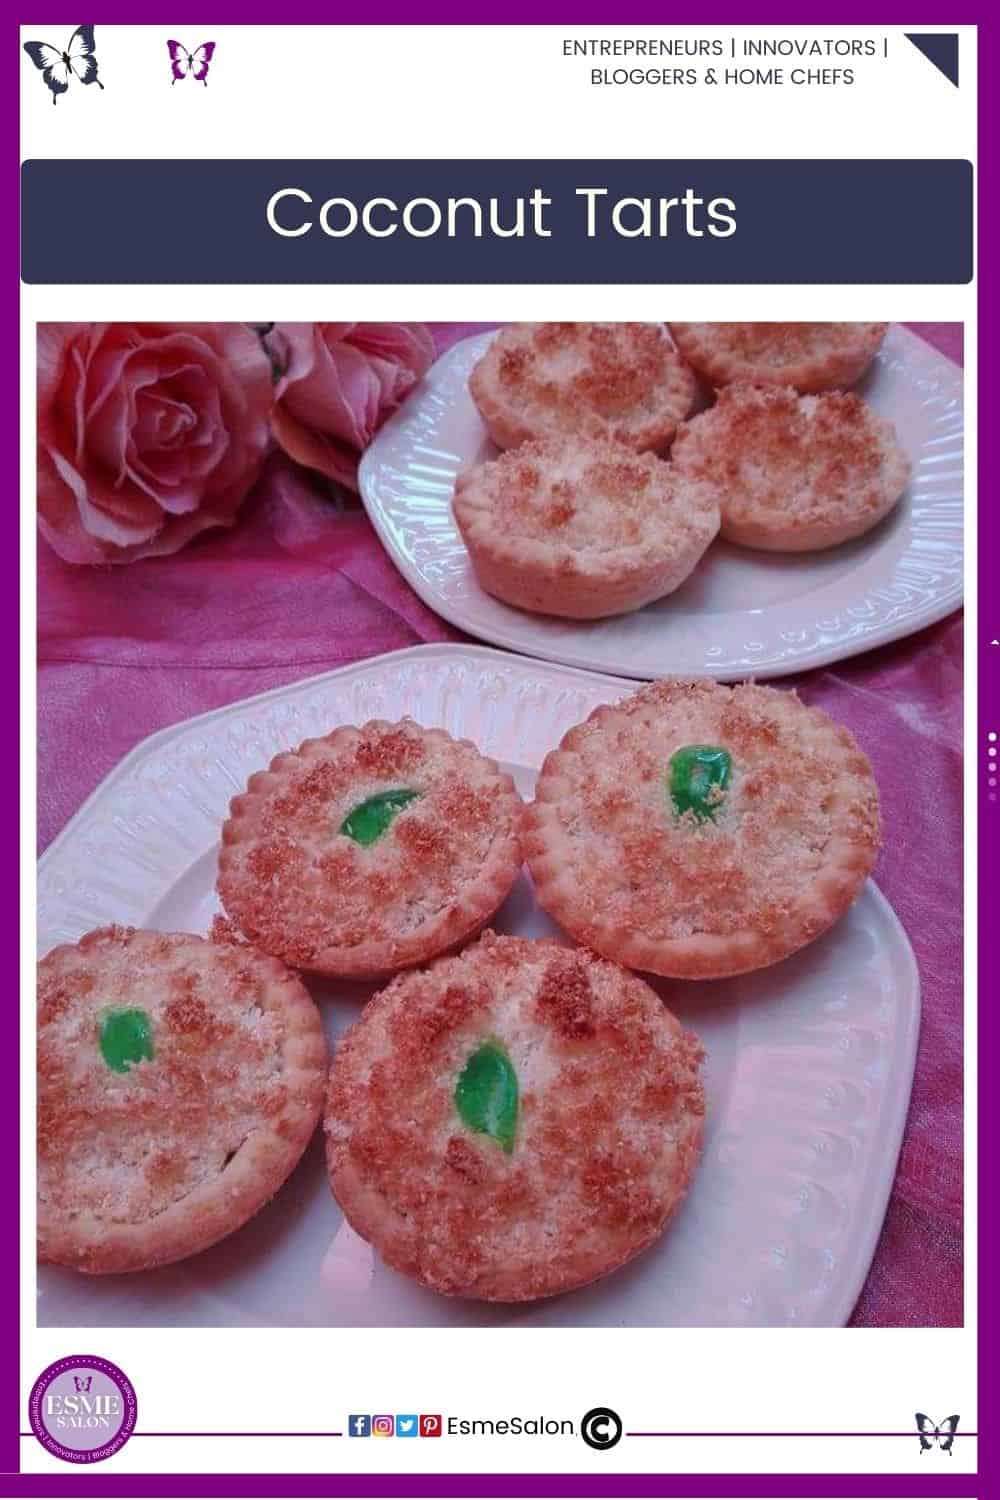 an image of small single serving Coconut Tarts filled with jam and topped with coconut and a sliver of red or green cherry